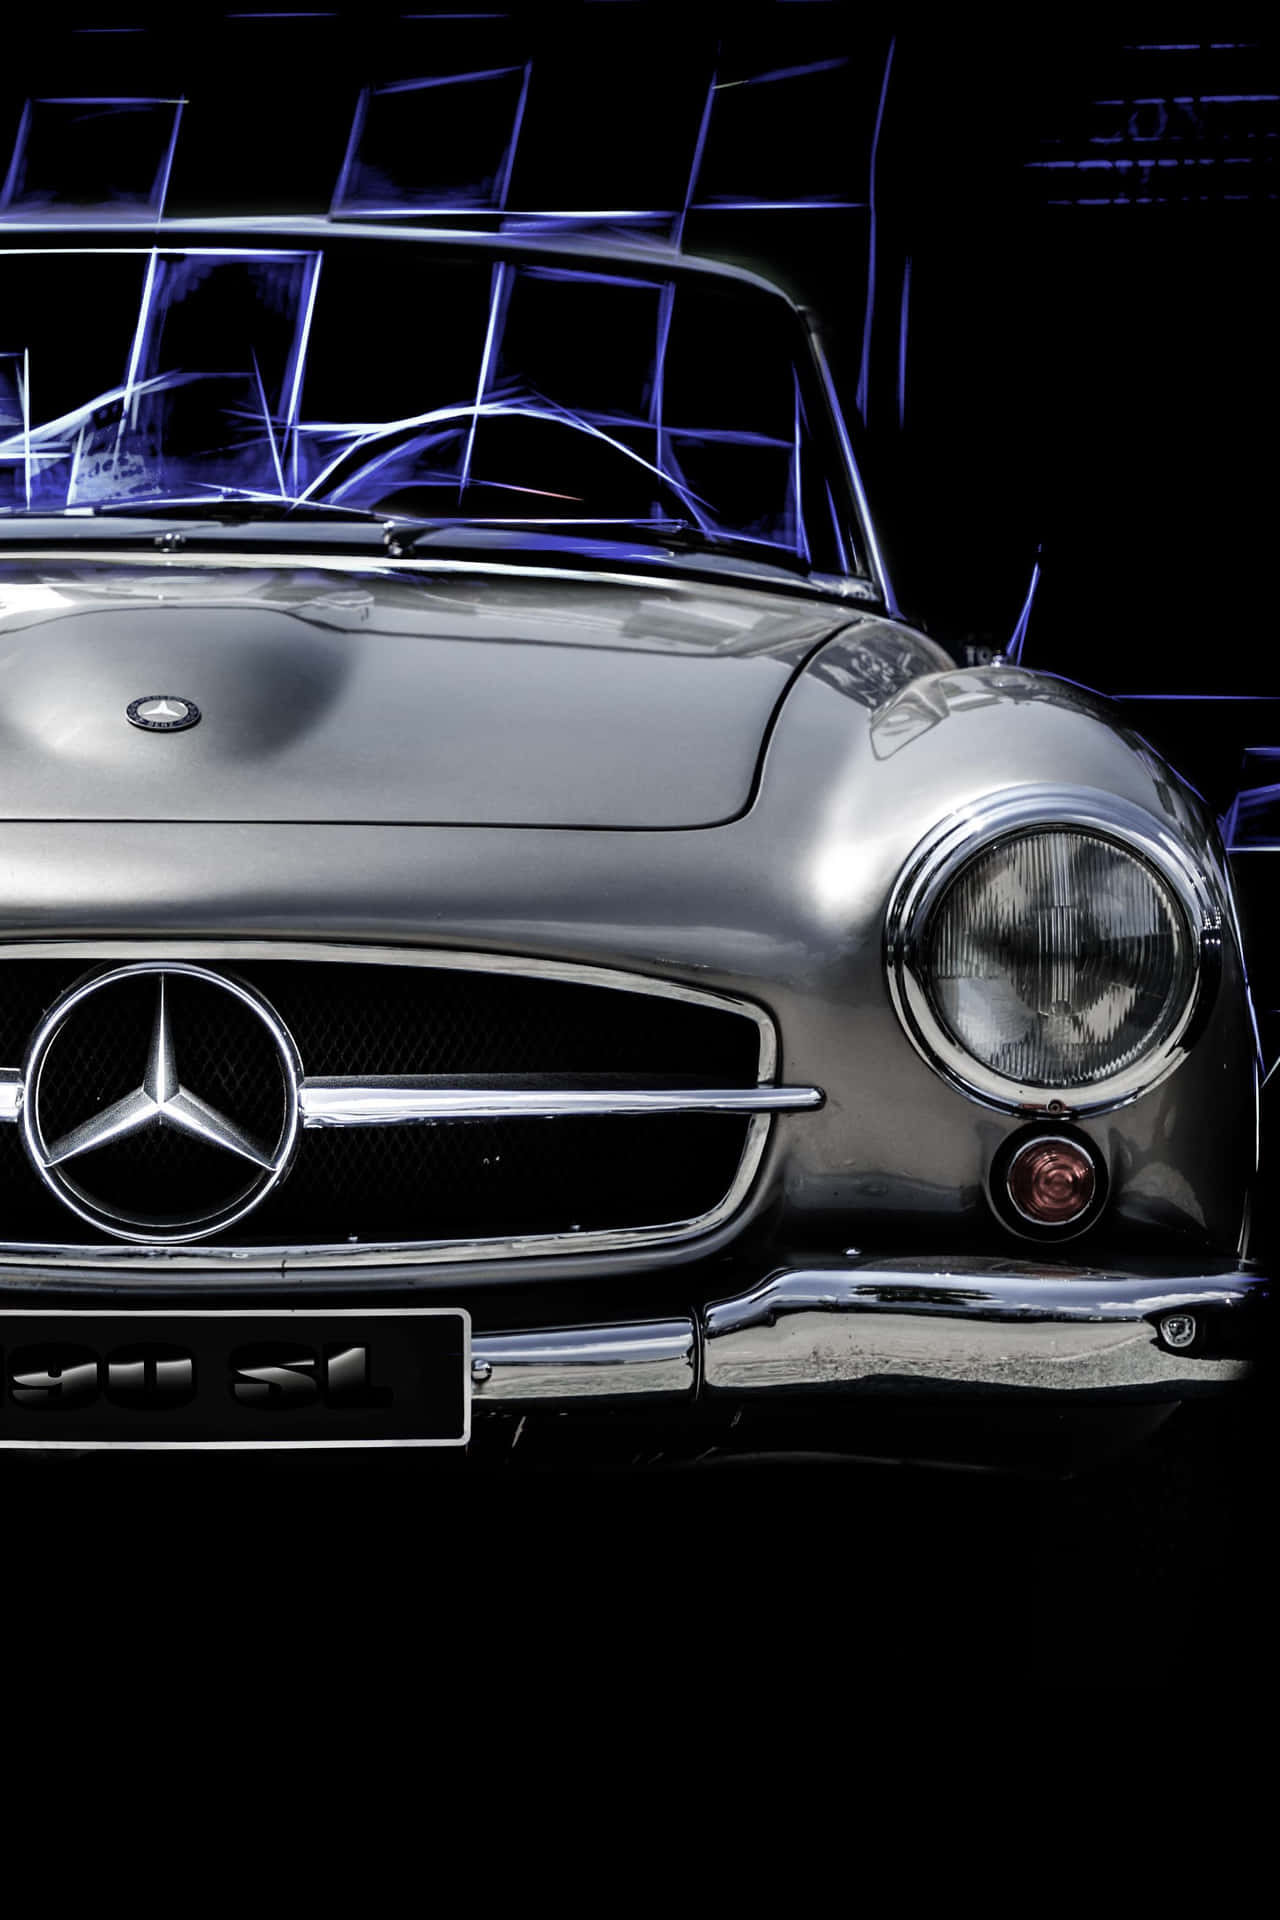 Get Connected with Mercedes Benz and the Iphone Wallpaper